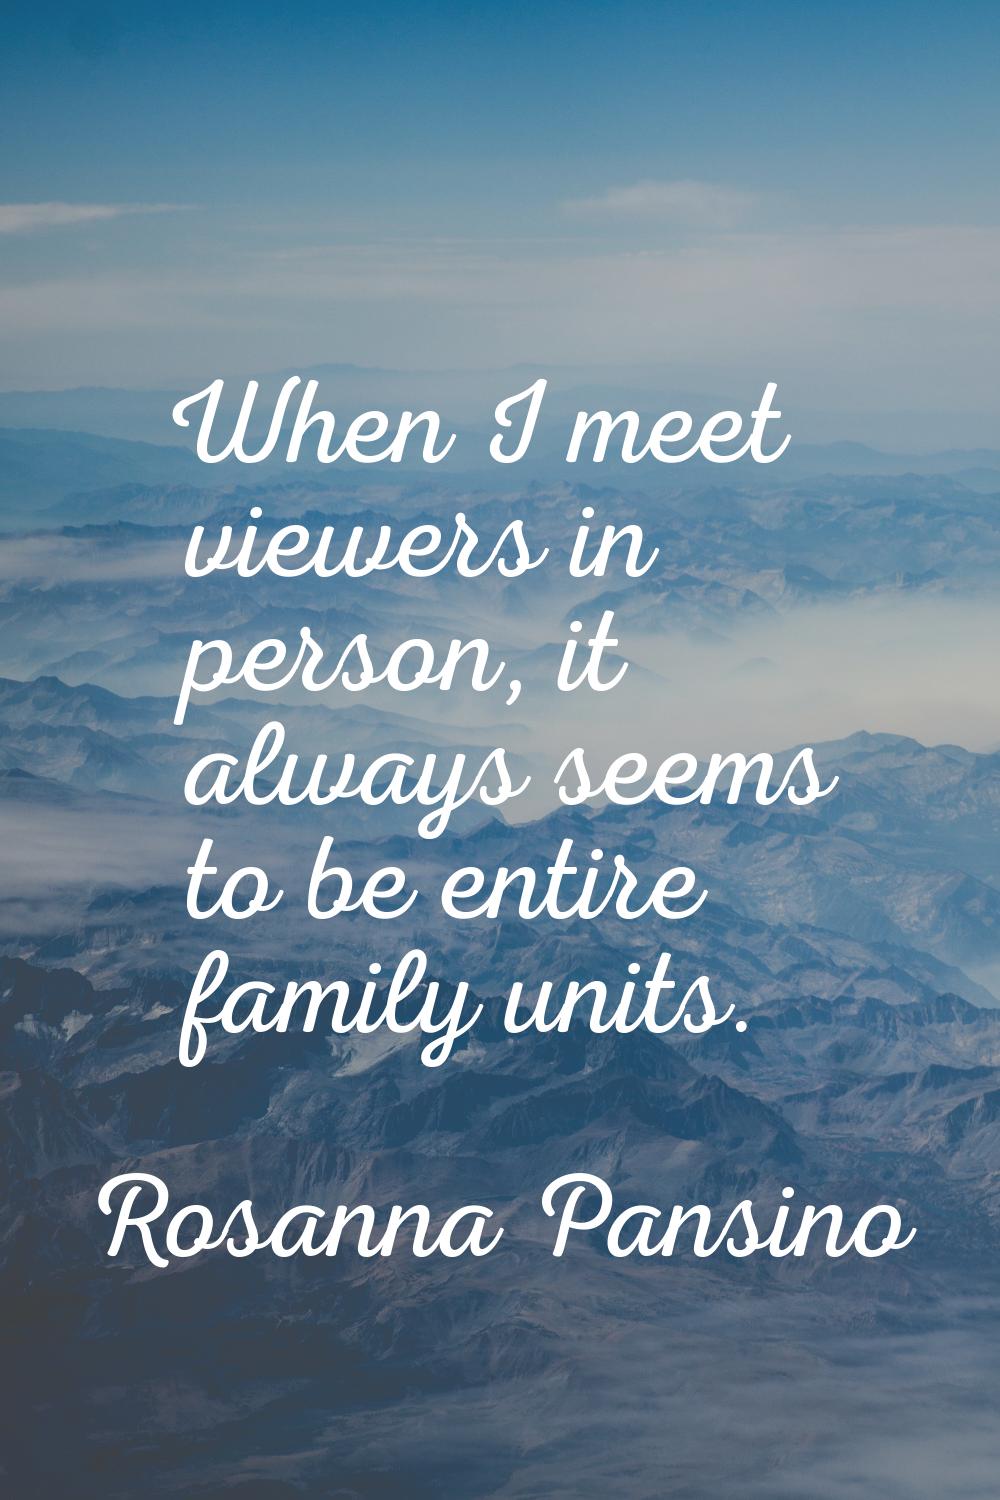 When I meet viewers in person, it always seems to be entire family units.